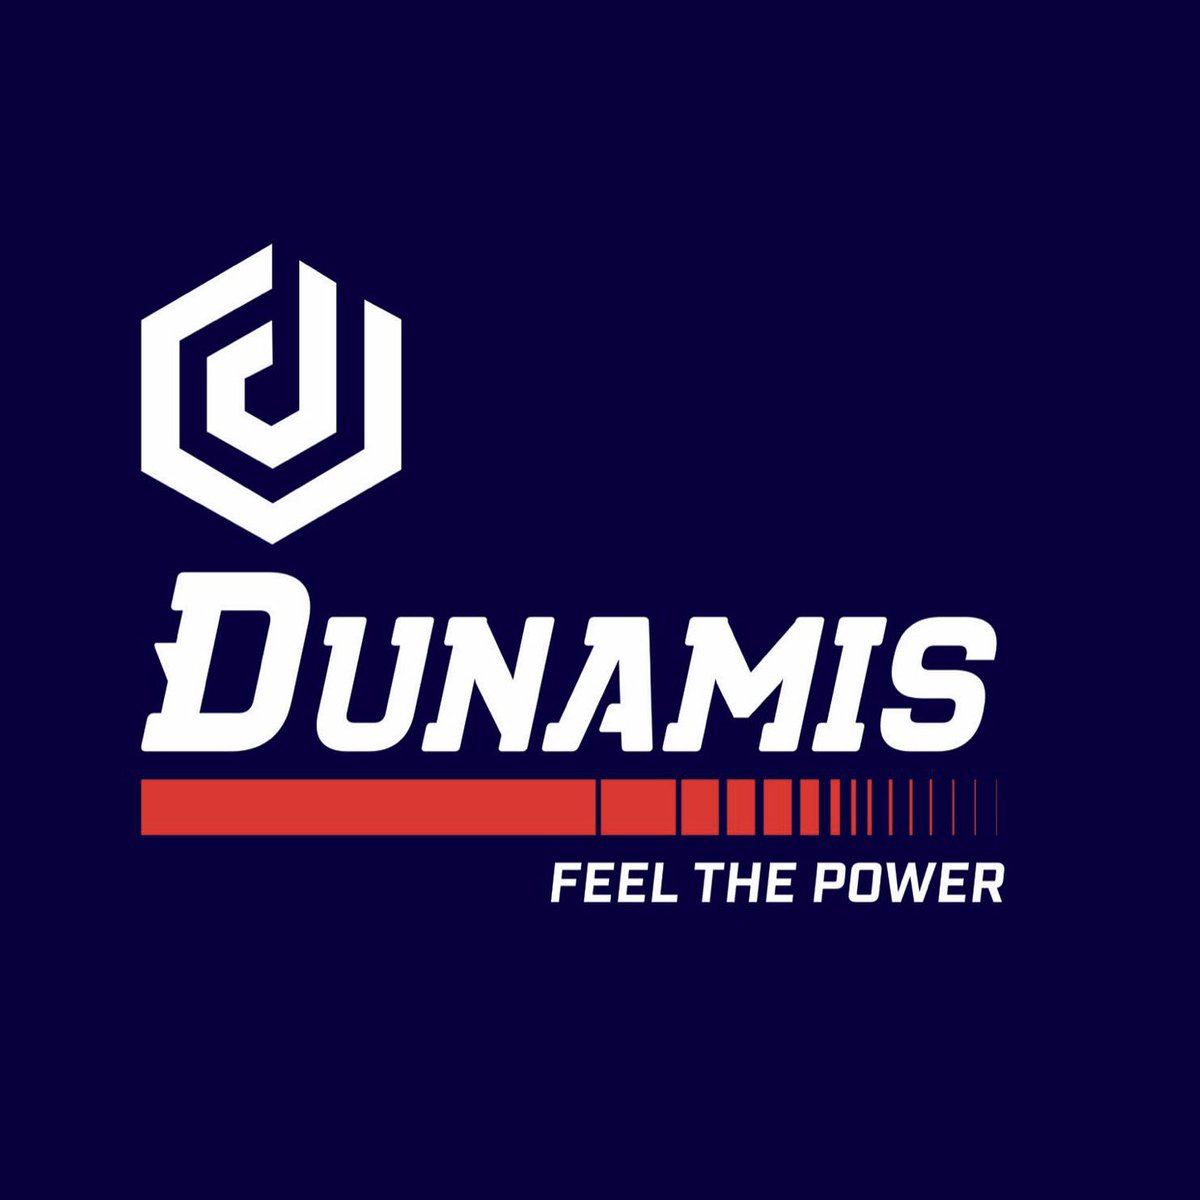 Some exciting things are on the horizon for Dunamis. Stay tuned.👀

dunamis-sports.com

#feelthepower #dunamissportswear #dunamiswear #icehockeyuk #icehockeyplayers #hockeylifestyle #hockeyseason #instahockey #clothingforsports #actionsportsclothing #apperal #sportclothing